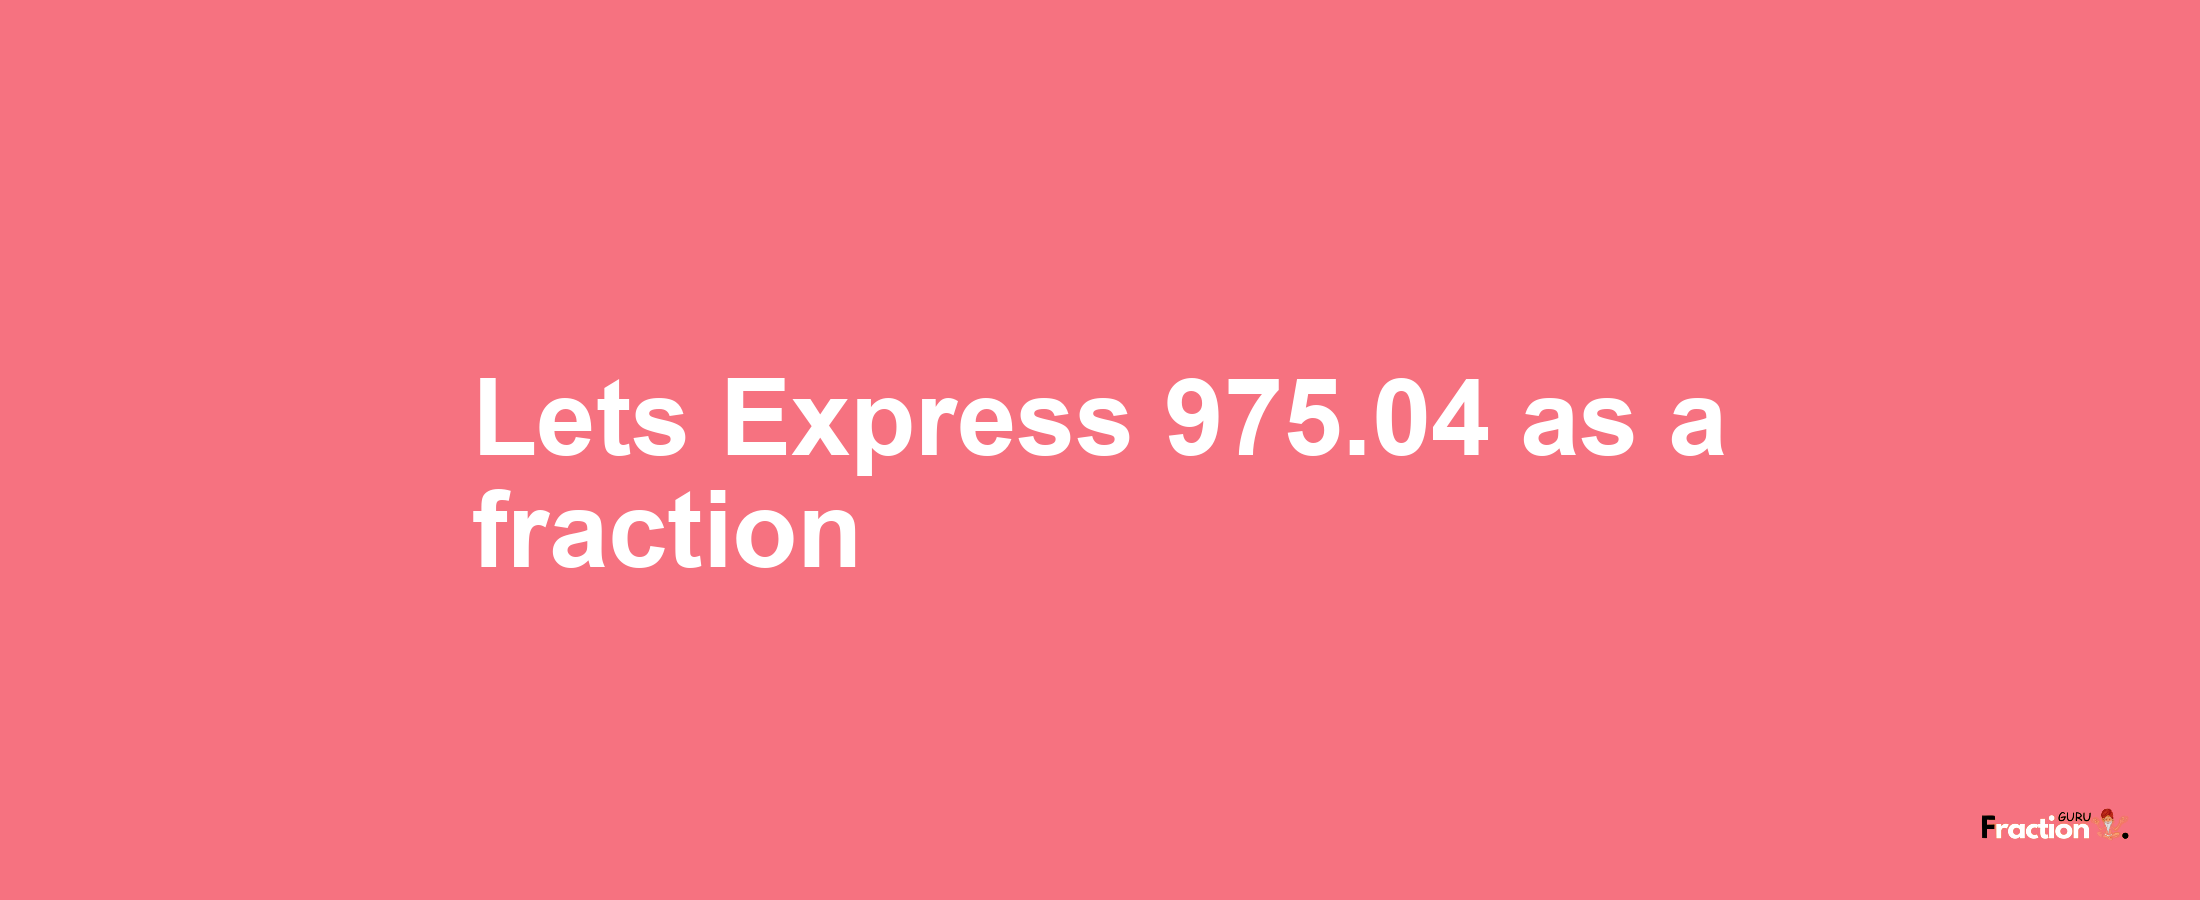 Lets Express 975.04 as afraction